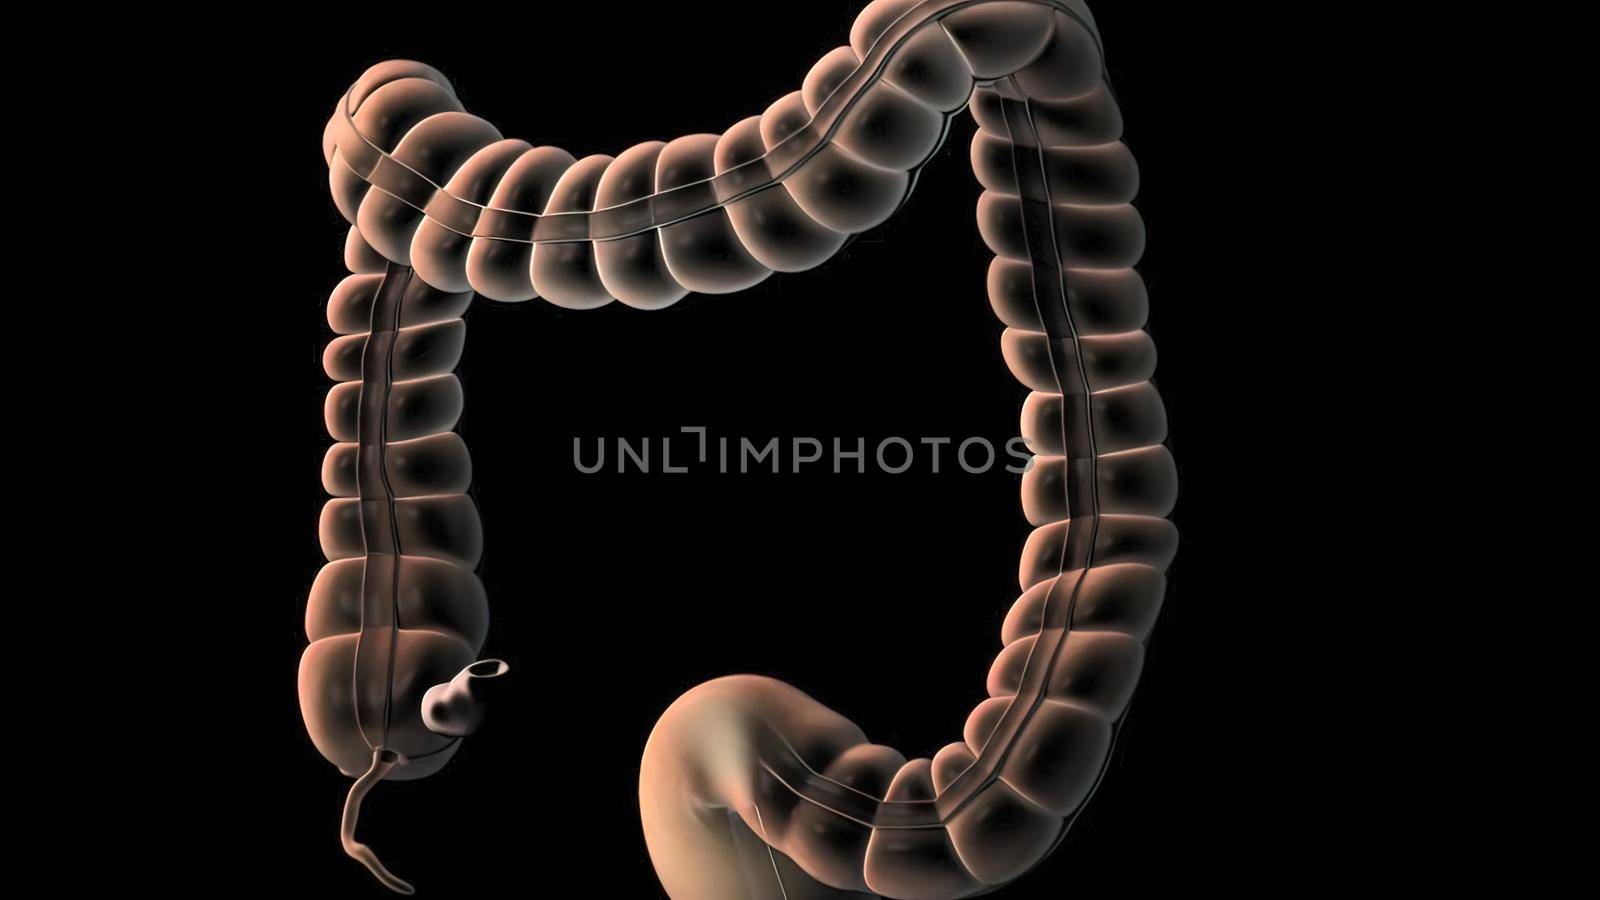 During a colonoscopy, a long, fleible tube (colonoscope) is inserted into the rectum. 3D illustration